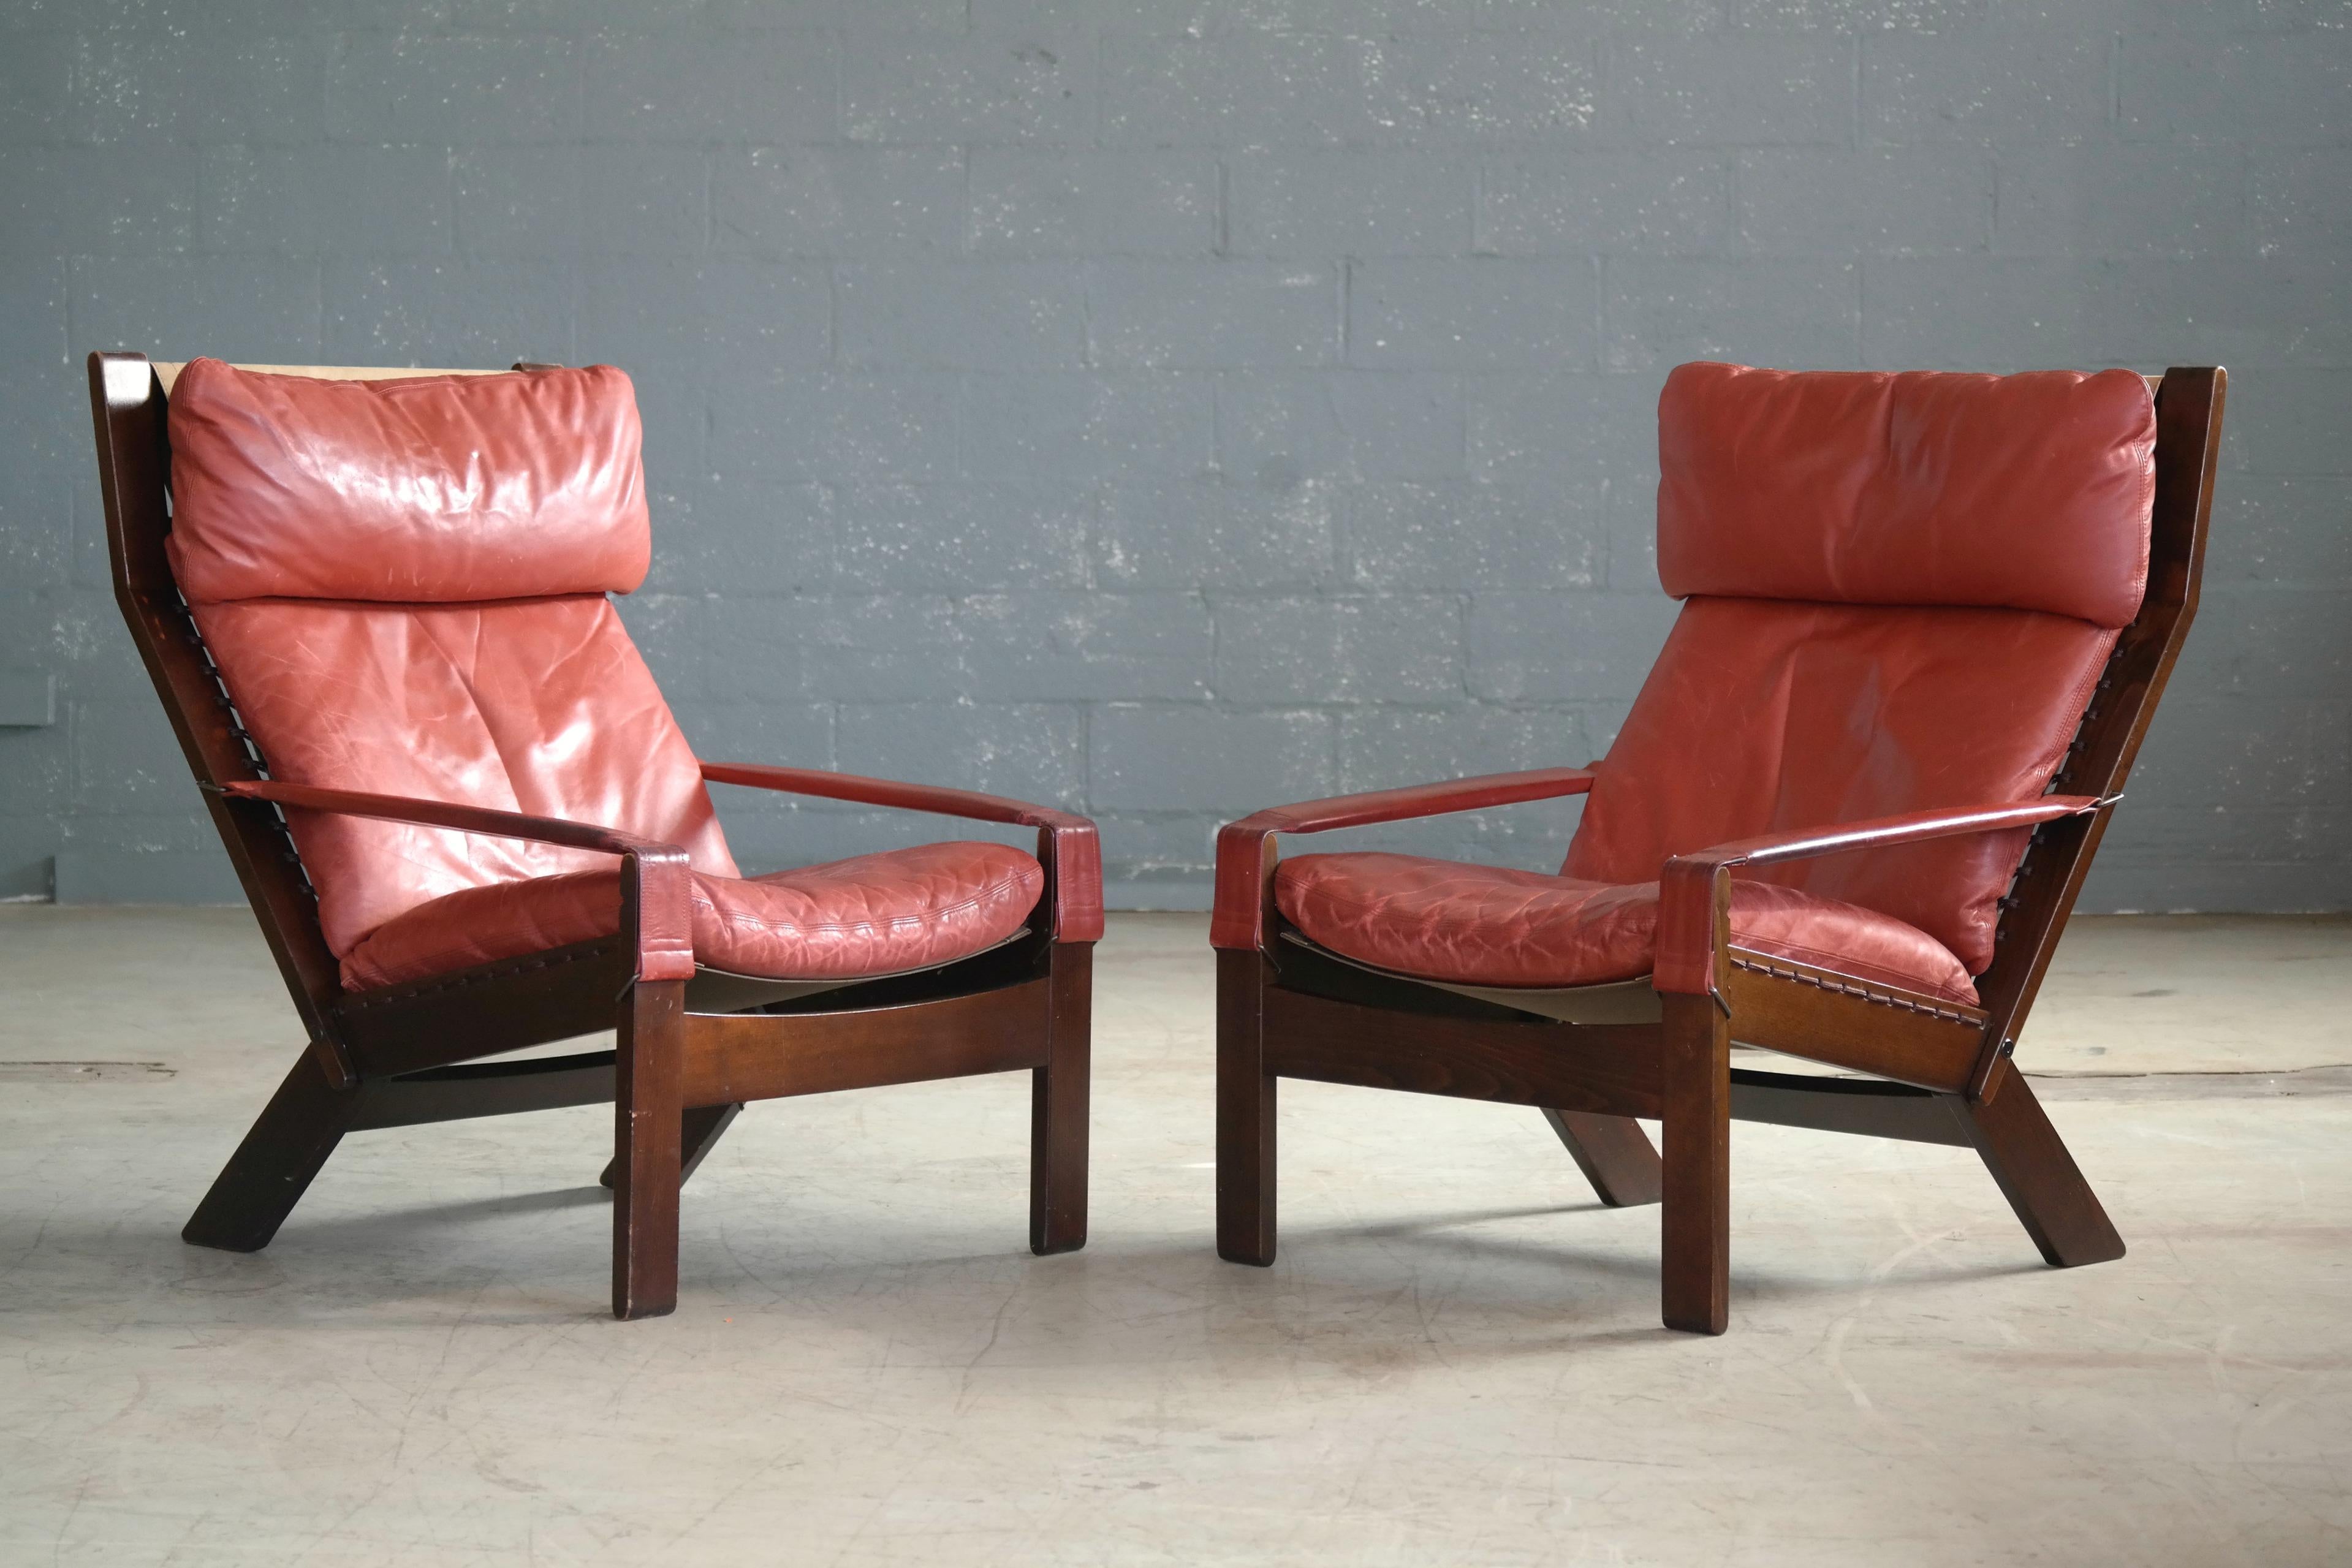 Great pair of reclining lounge chairs designed by Sigurd Ressell for the Norwegian company Westnofa in 1969 and relatives of Ressell's more famous Falcon and Siesta chairs. If anything these chairs probably deserves as much recognition as they